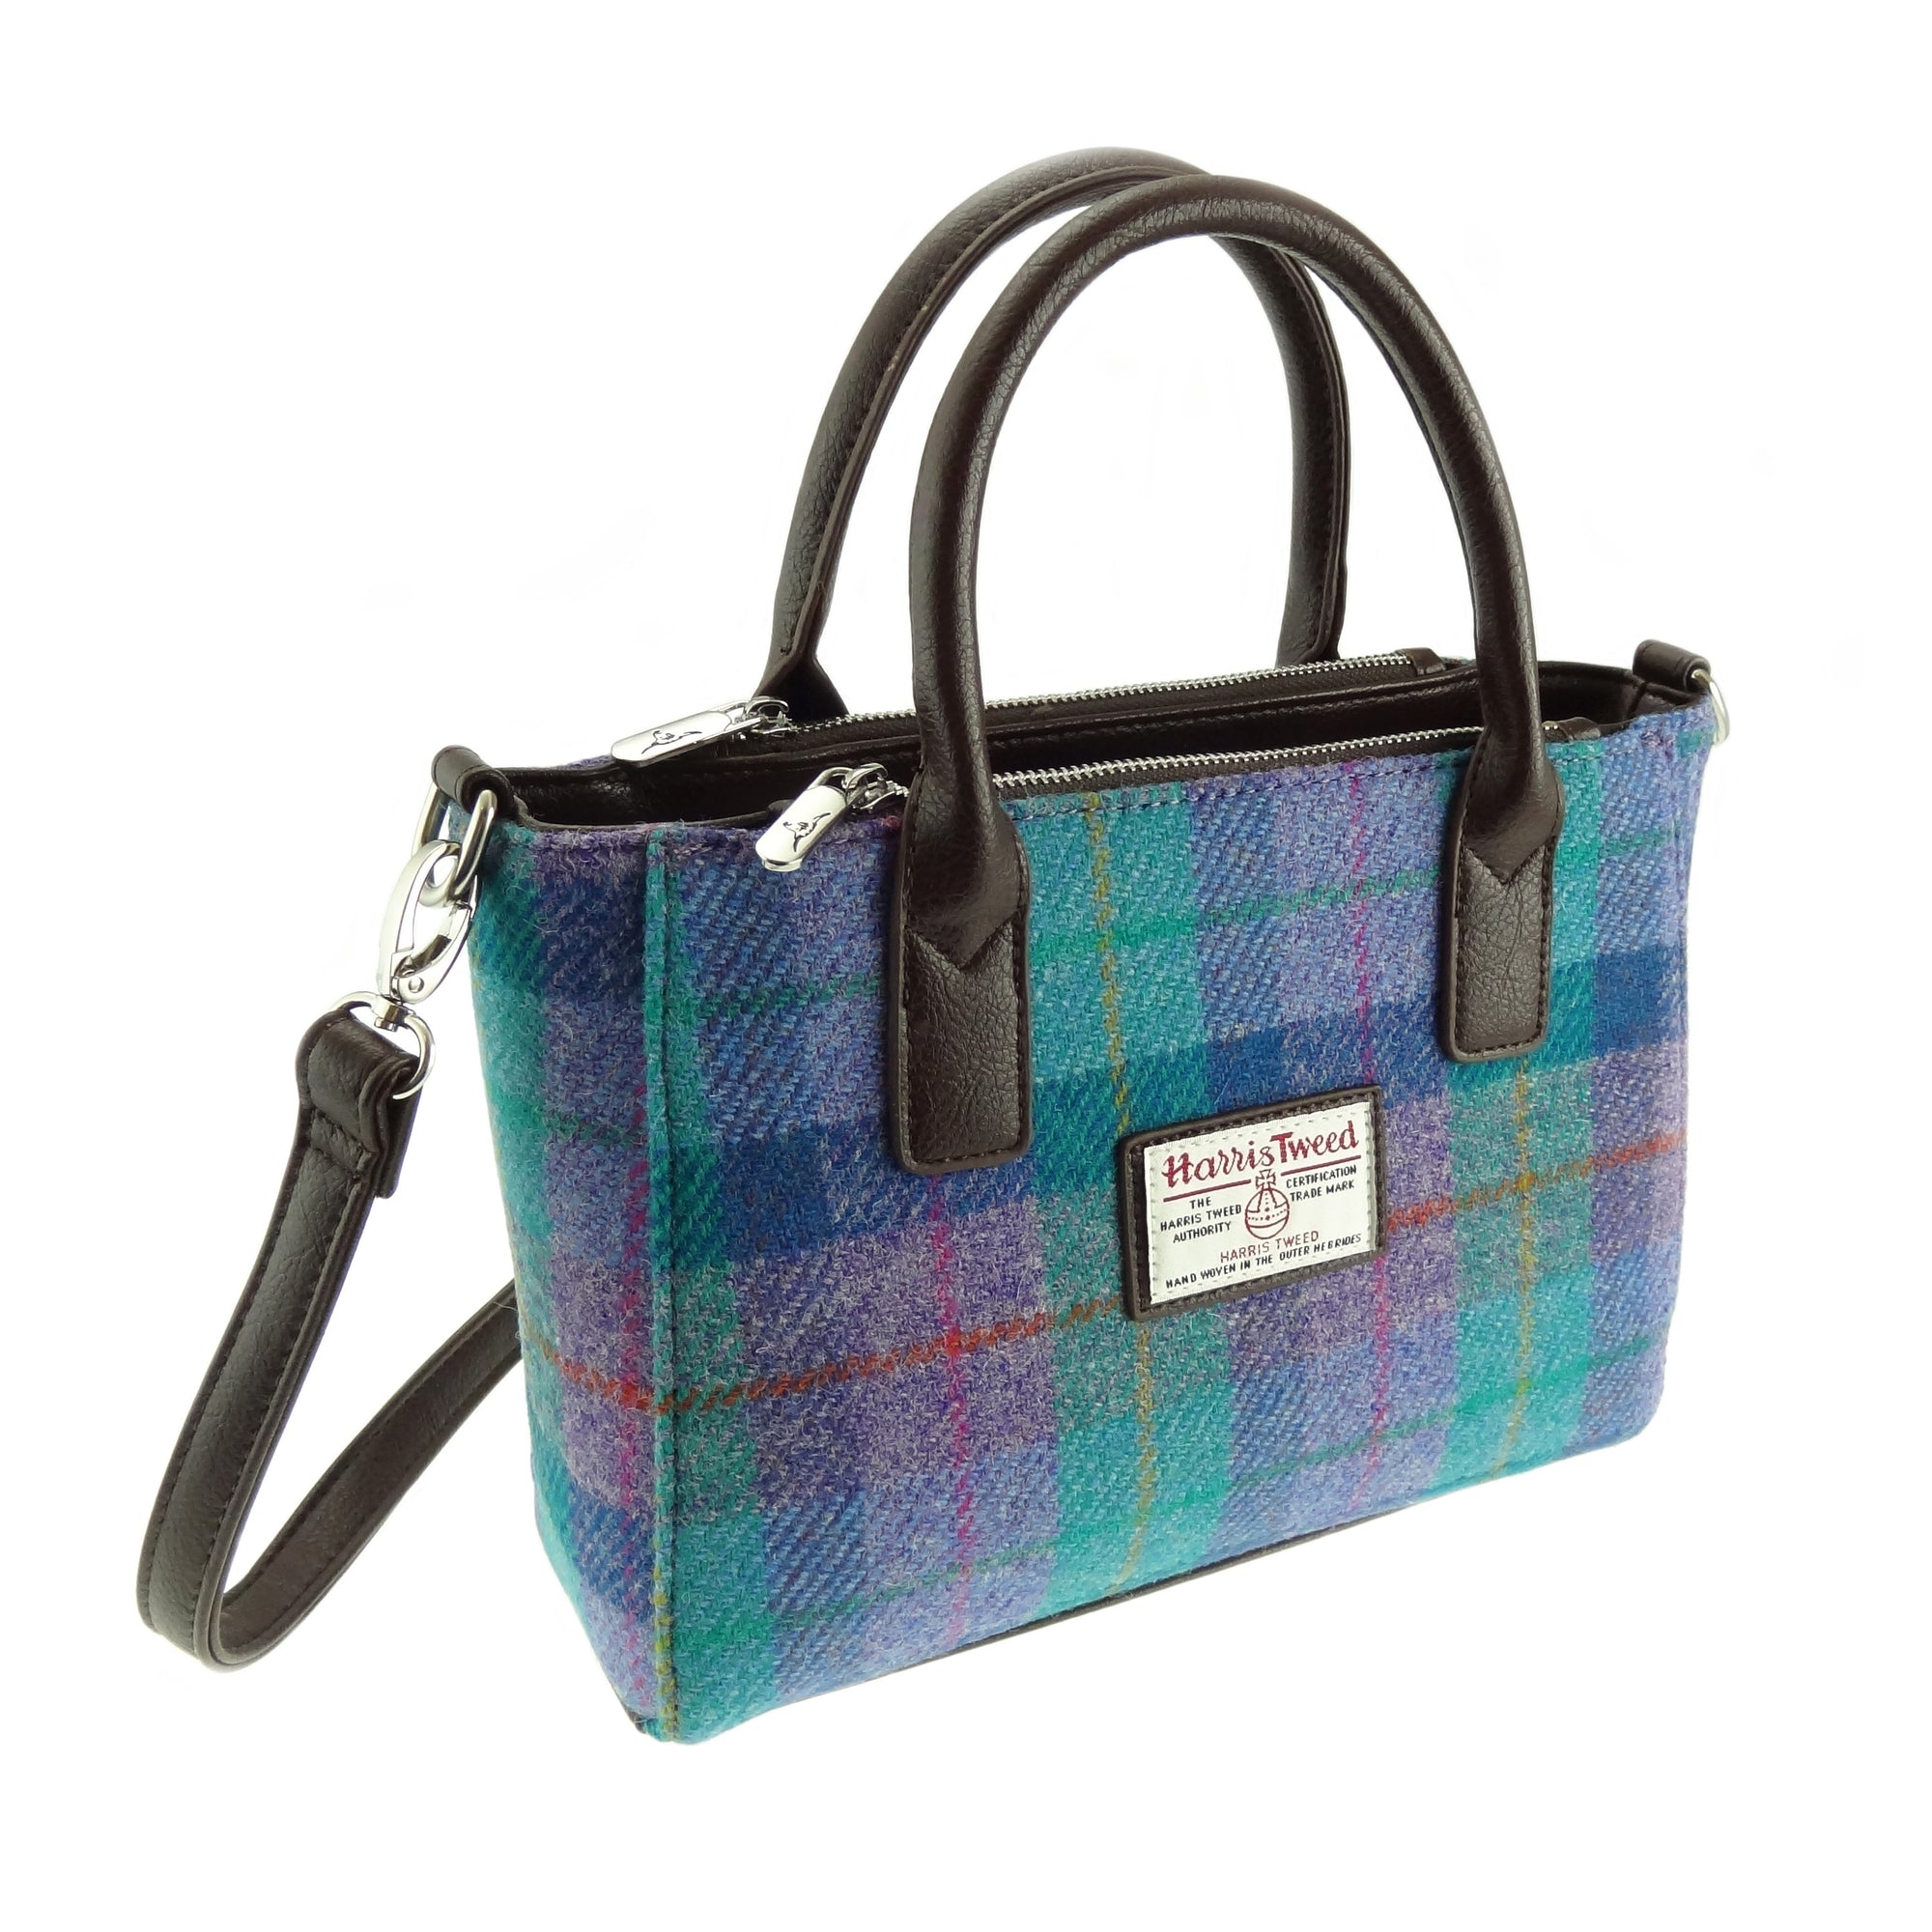 Harris Tweed Small Tote Bag with Shoulder Strap | 10% Off Your First ...